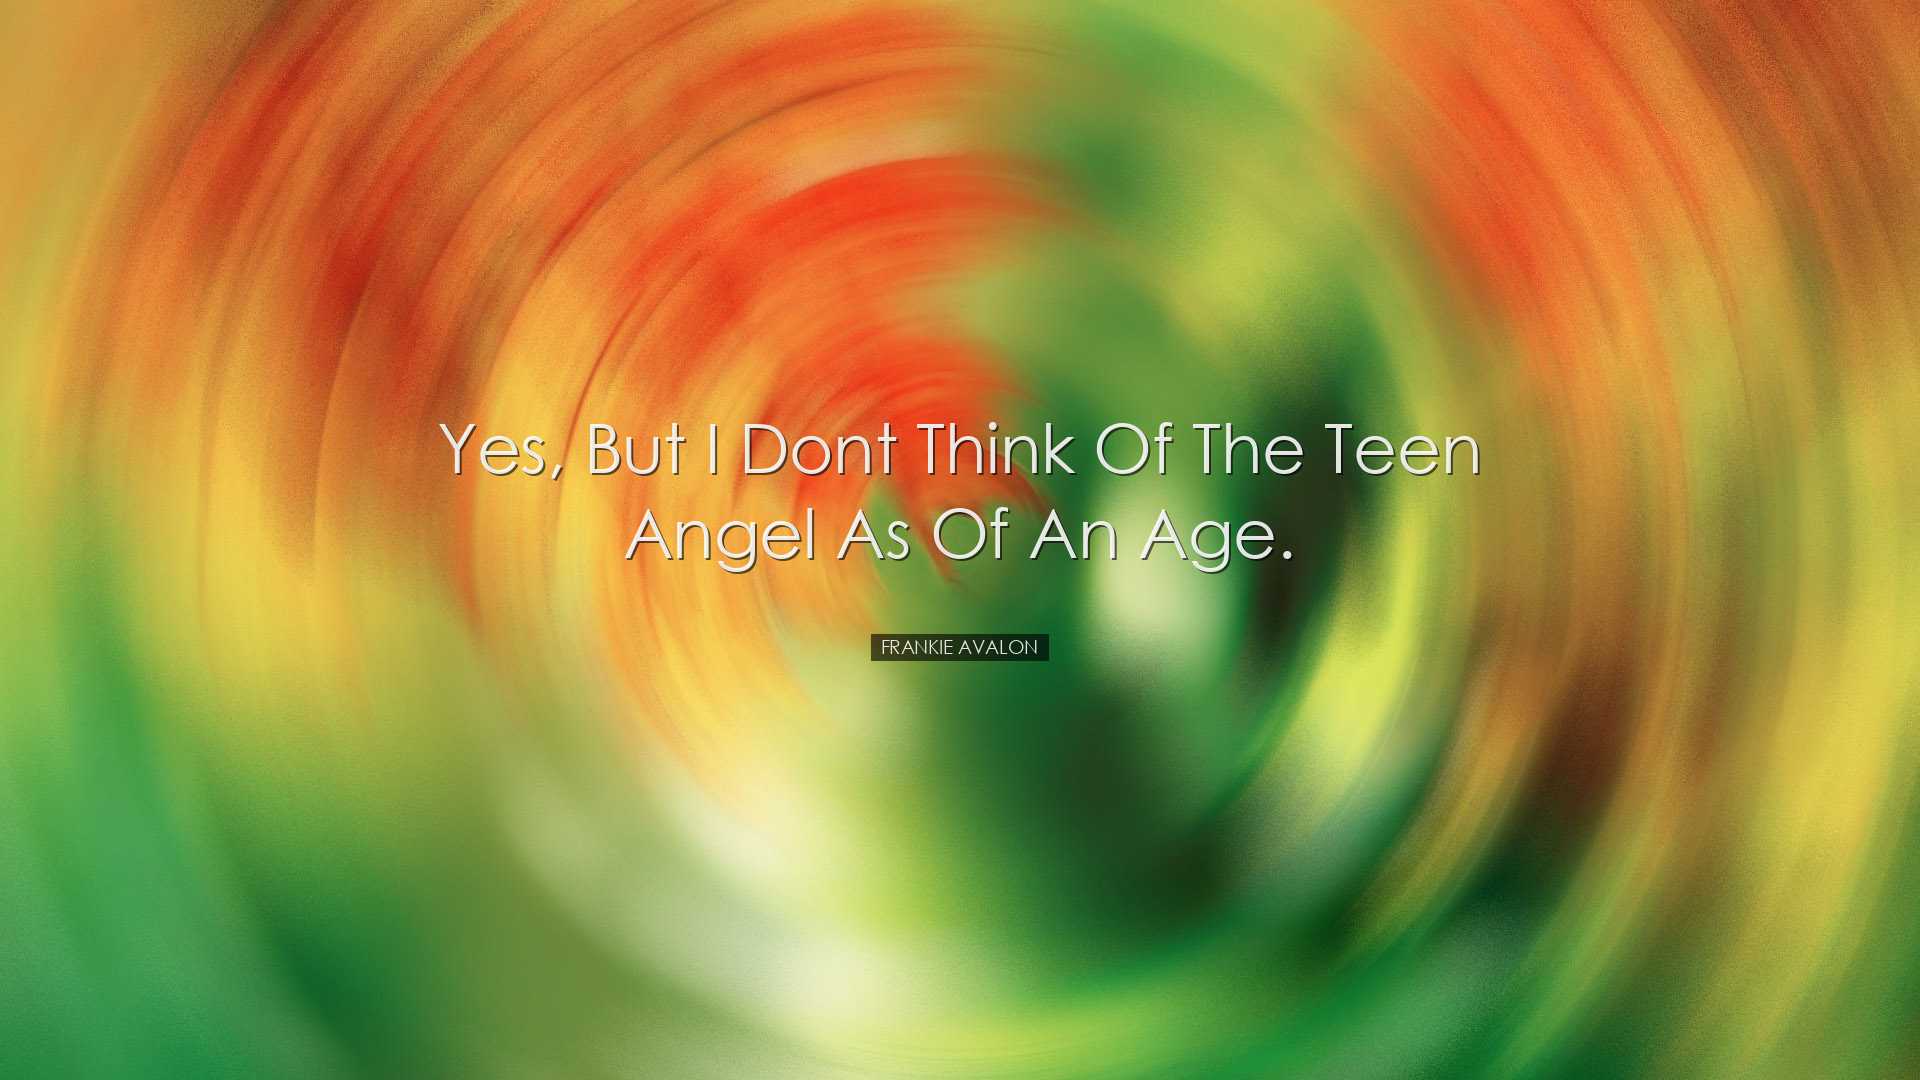 Yes, but I dont think of the Teen Angel as of an age. - Frankie Av